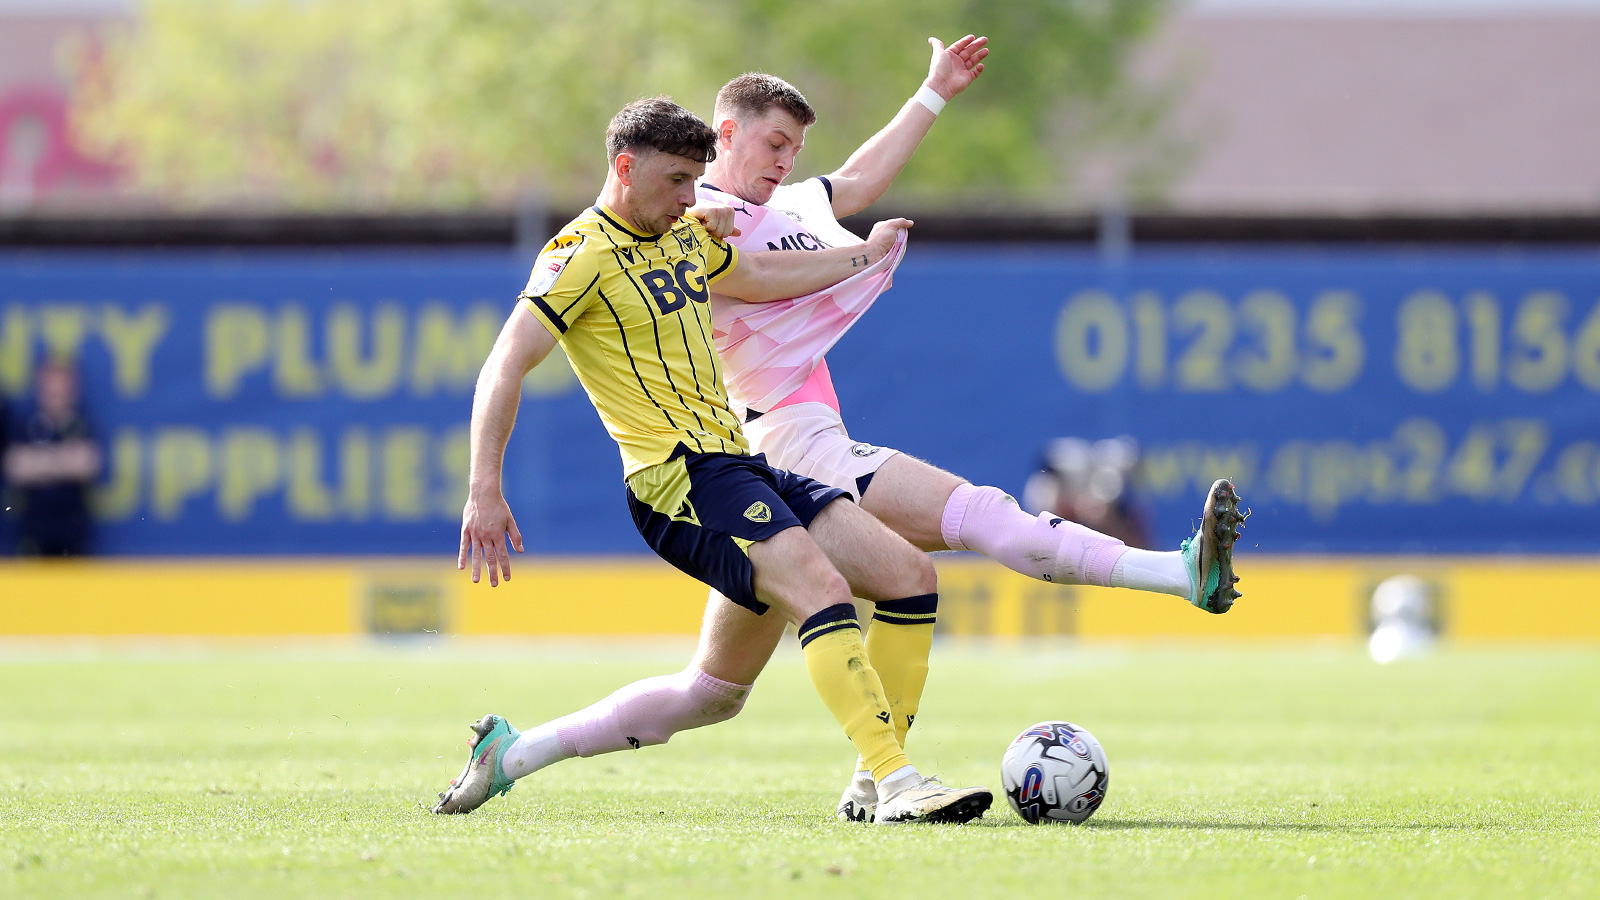 Josh Knight in action against Oxford United